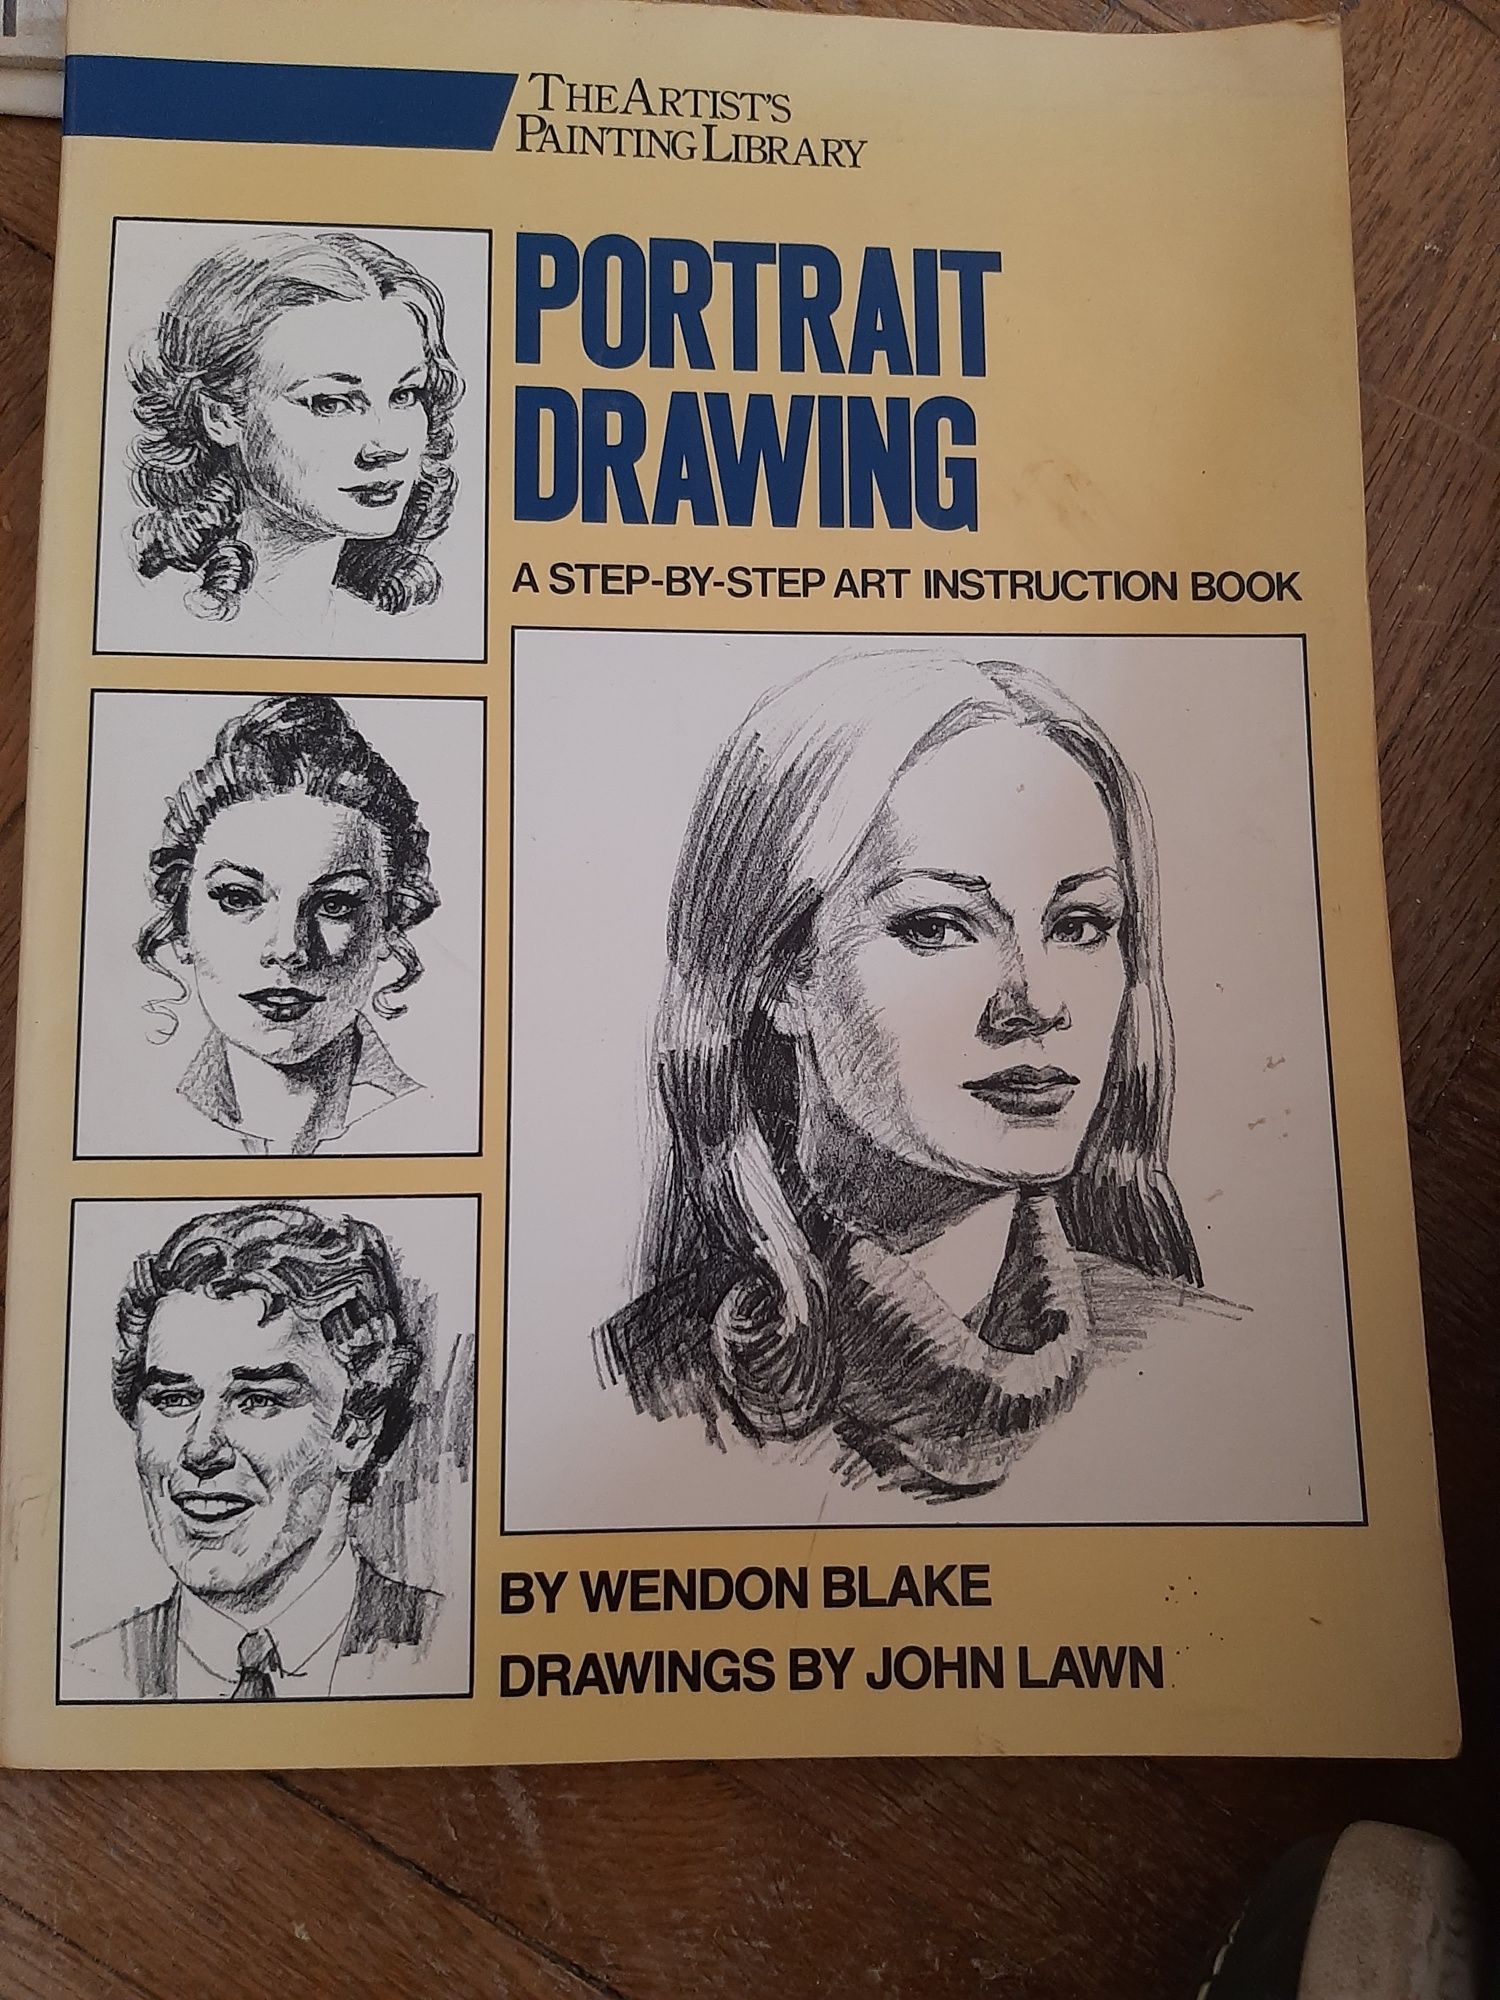 Portrety. Portrait drawing a step by step art instruction book n